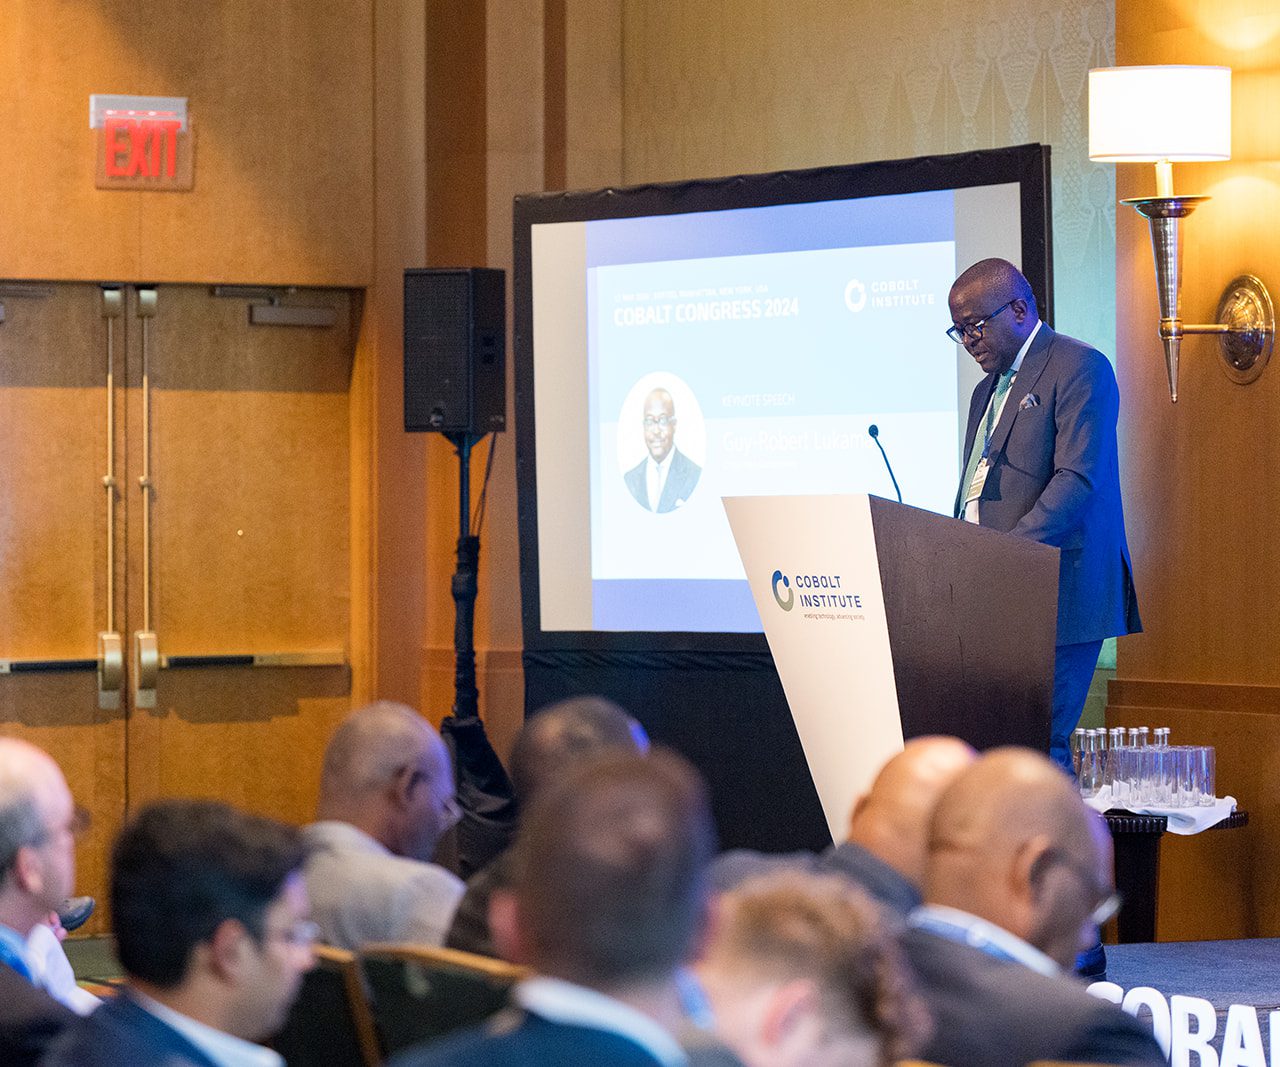 Gécamines Chairman Guy Robert Lukama gave a keynote address at the Cobalt Congress in New York City